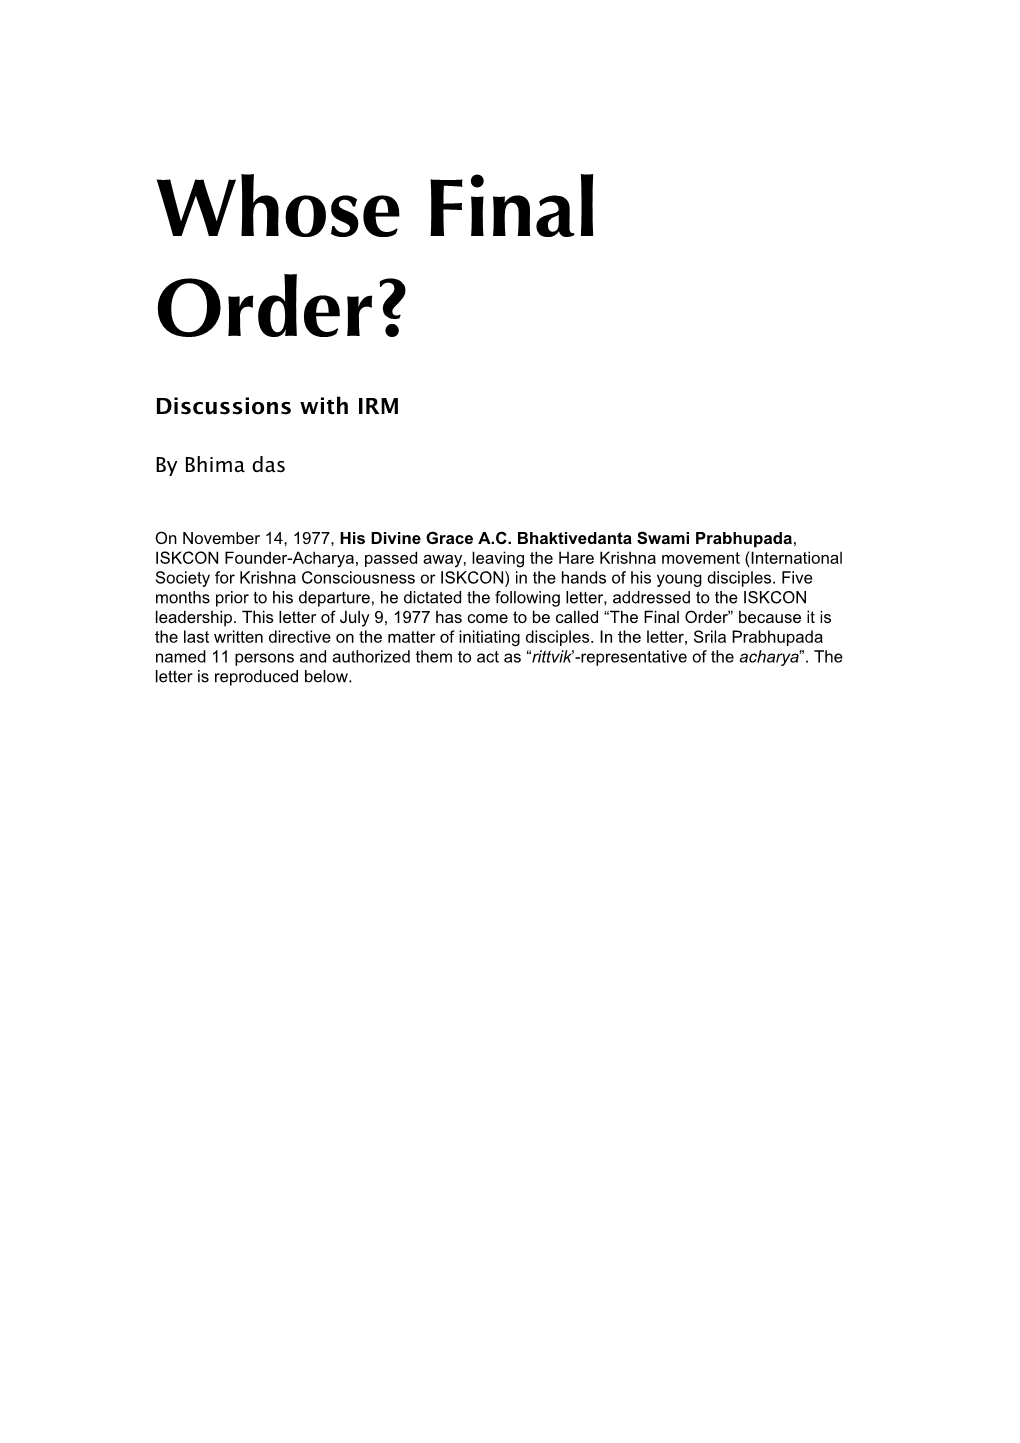 Whose Final Order?